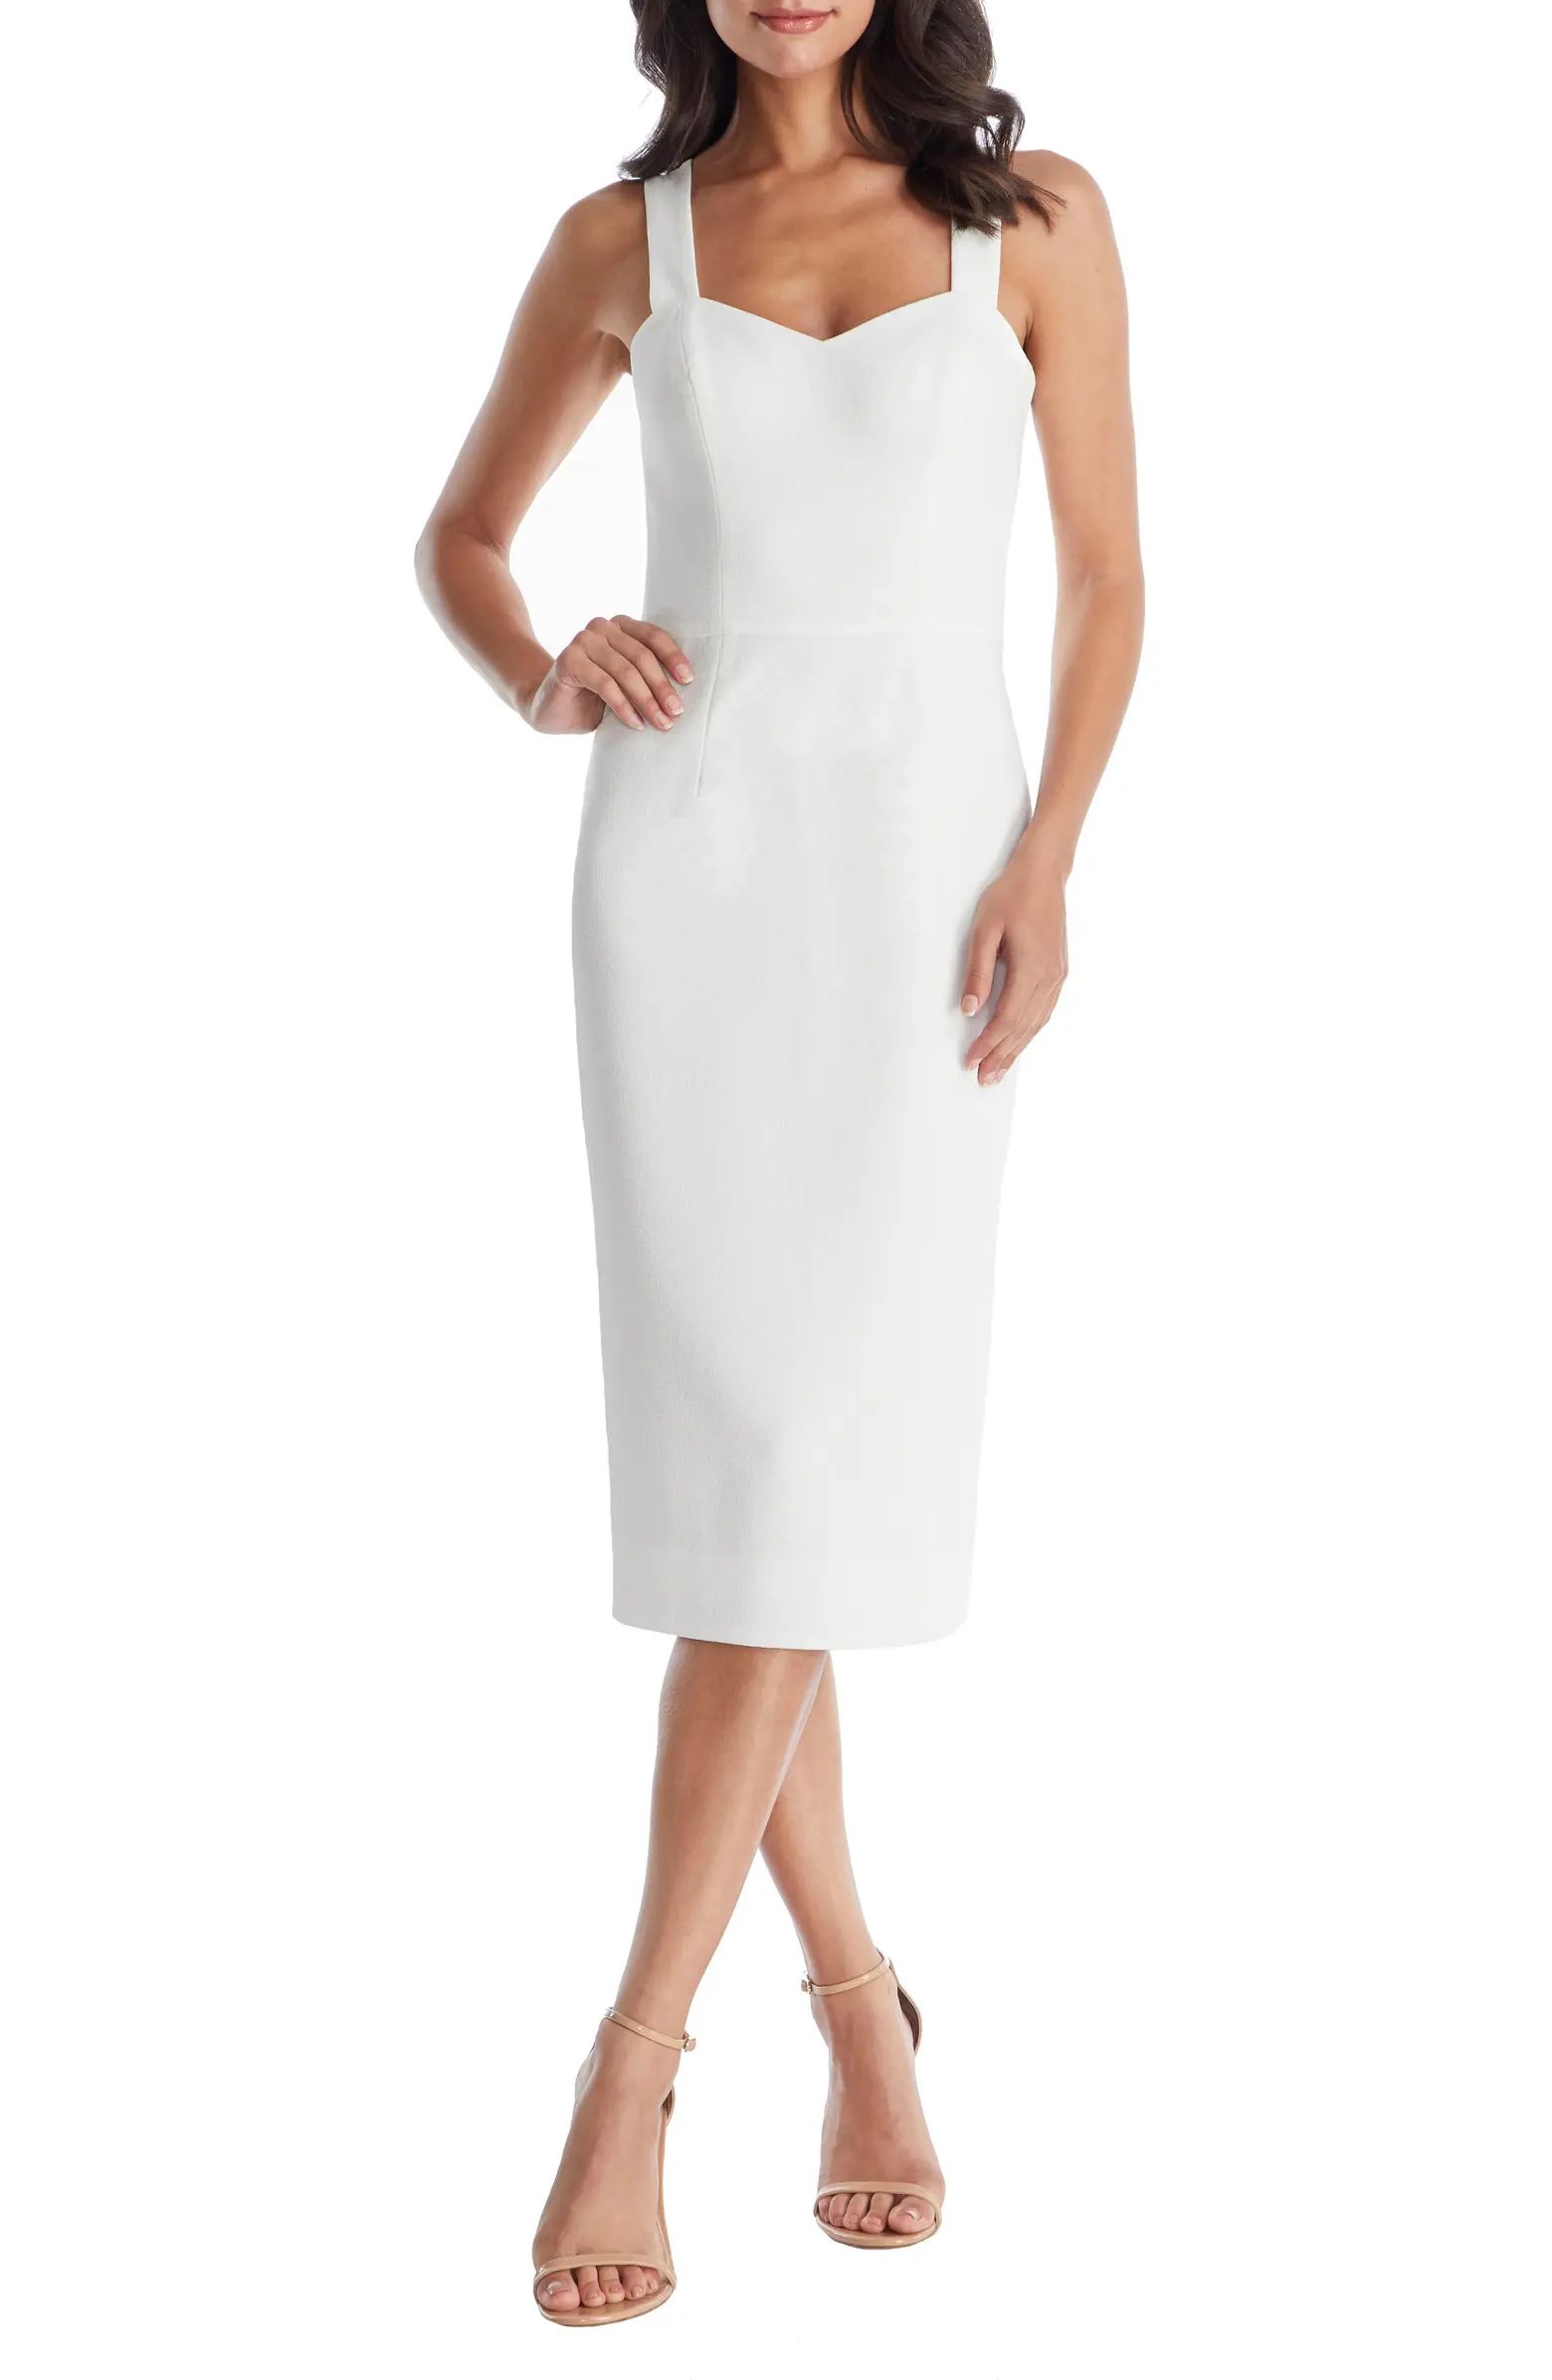 Nicole Sweetheart Neck Cocktail Dress | Nordstrom